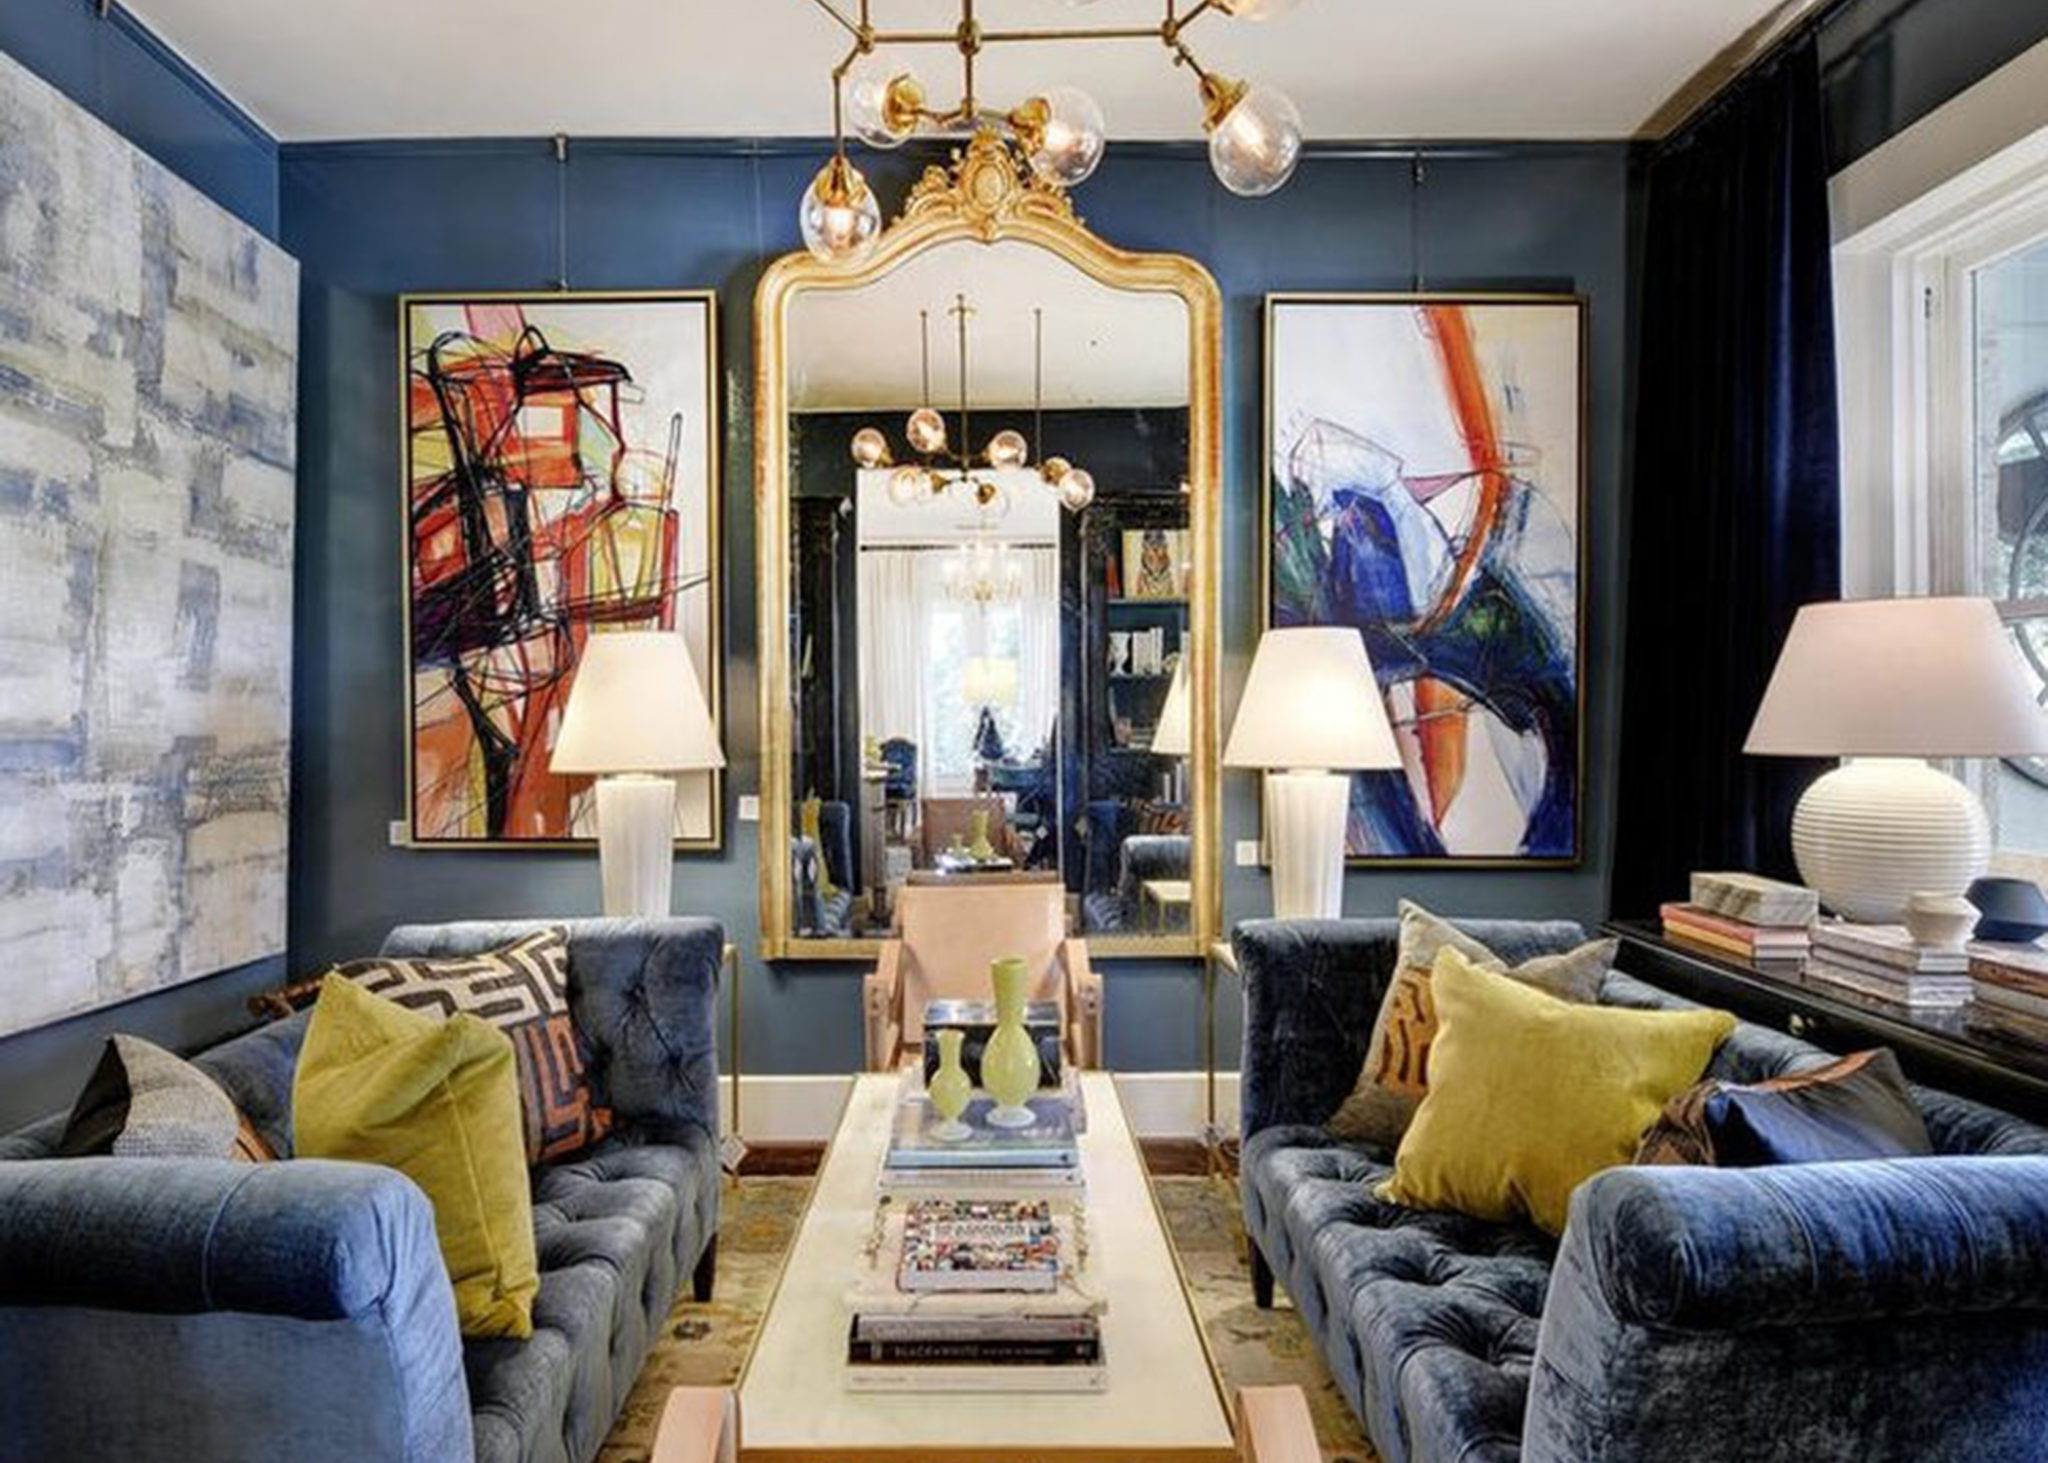 Living room with blue interiors